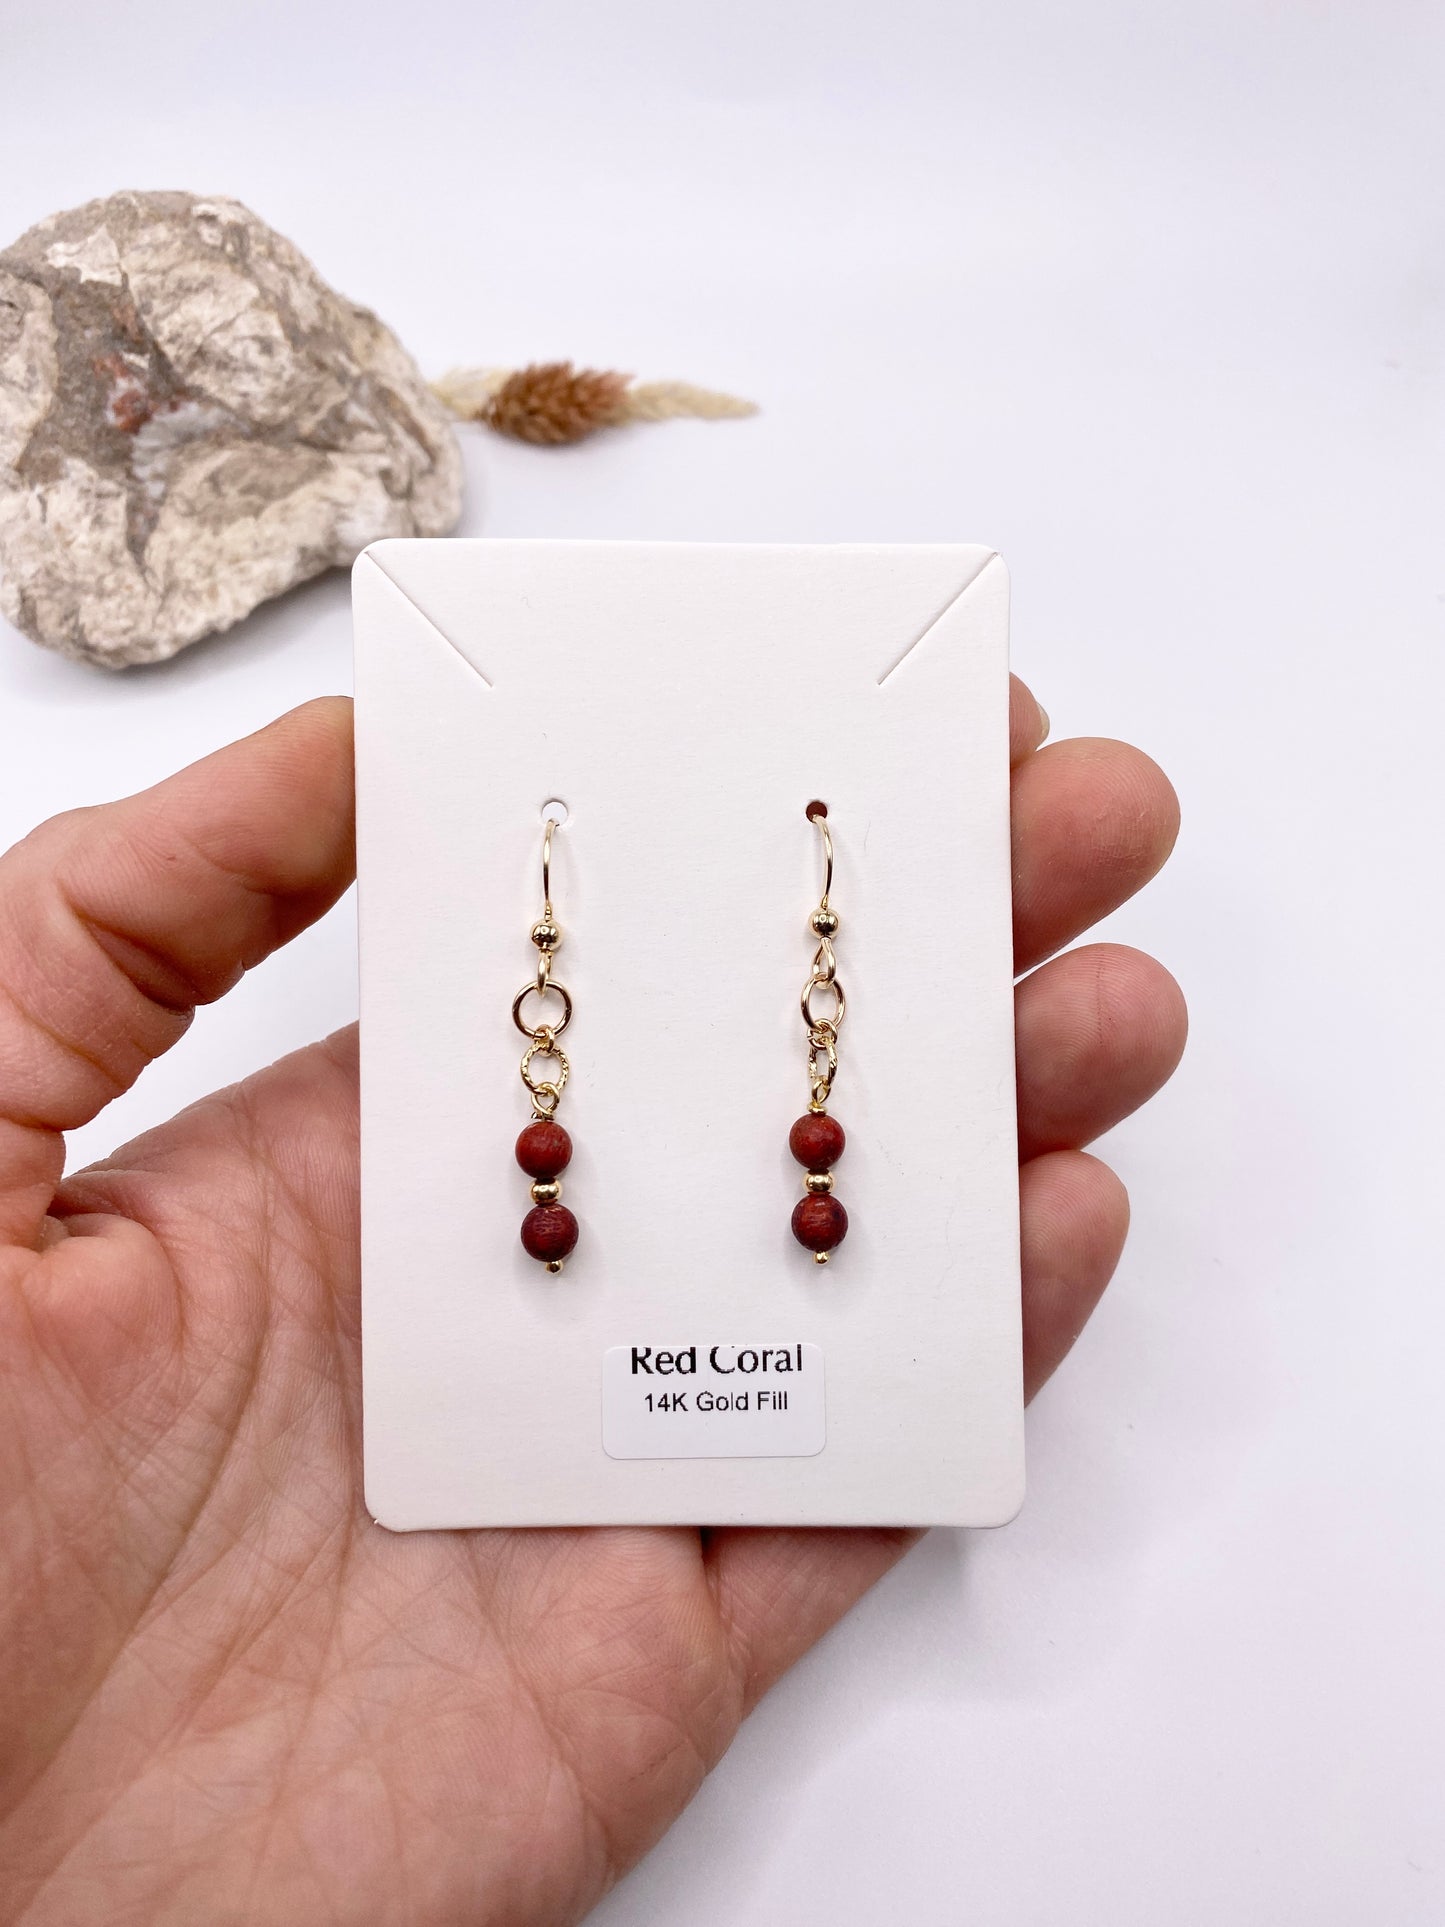 Red Coral Earrings in 14K Yellow Gold Fill